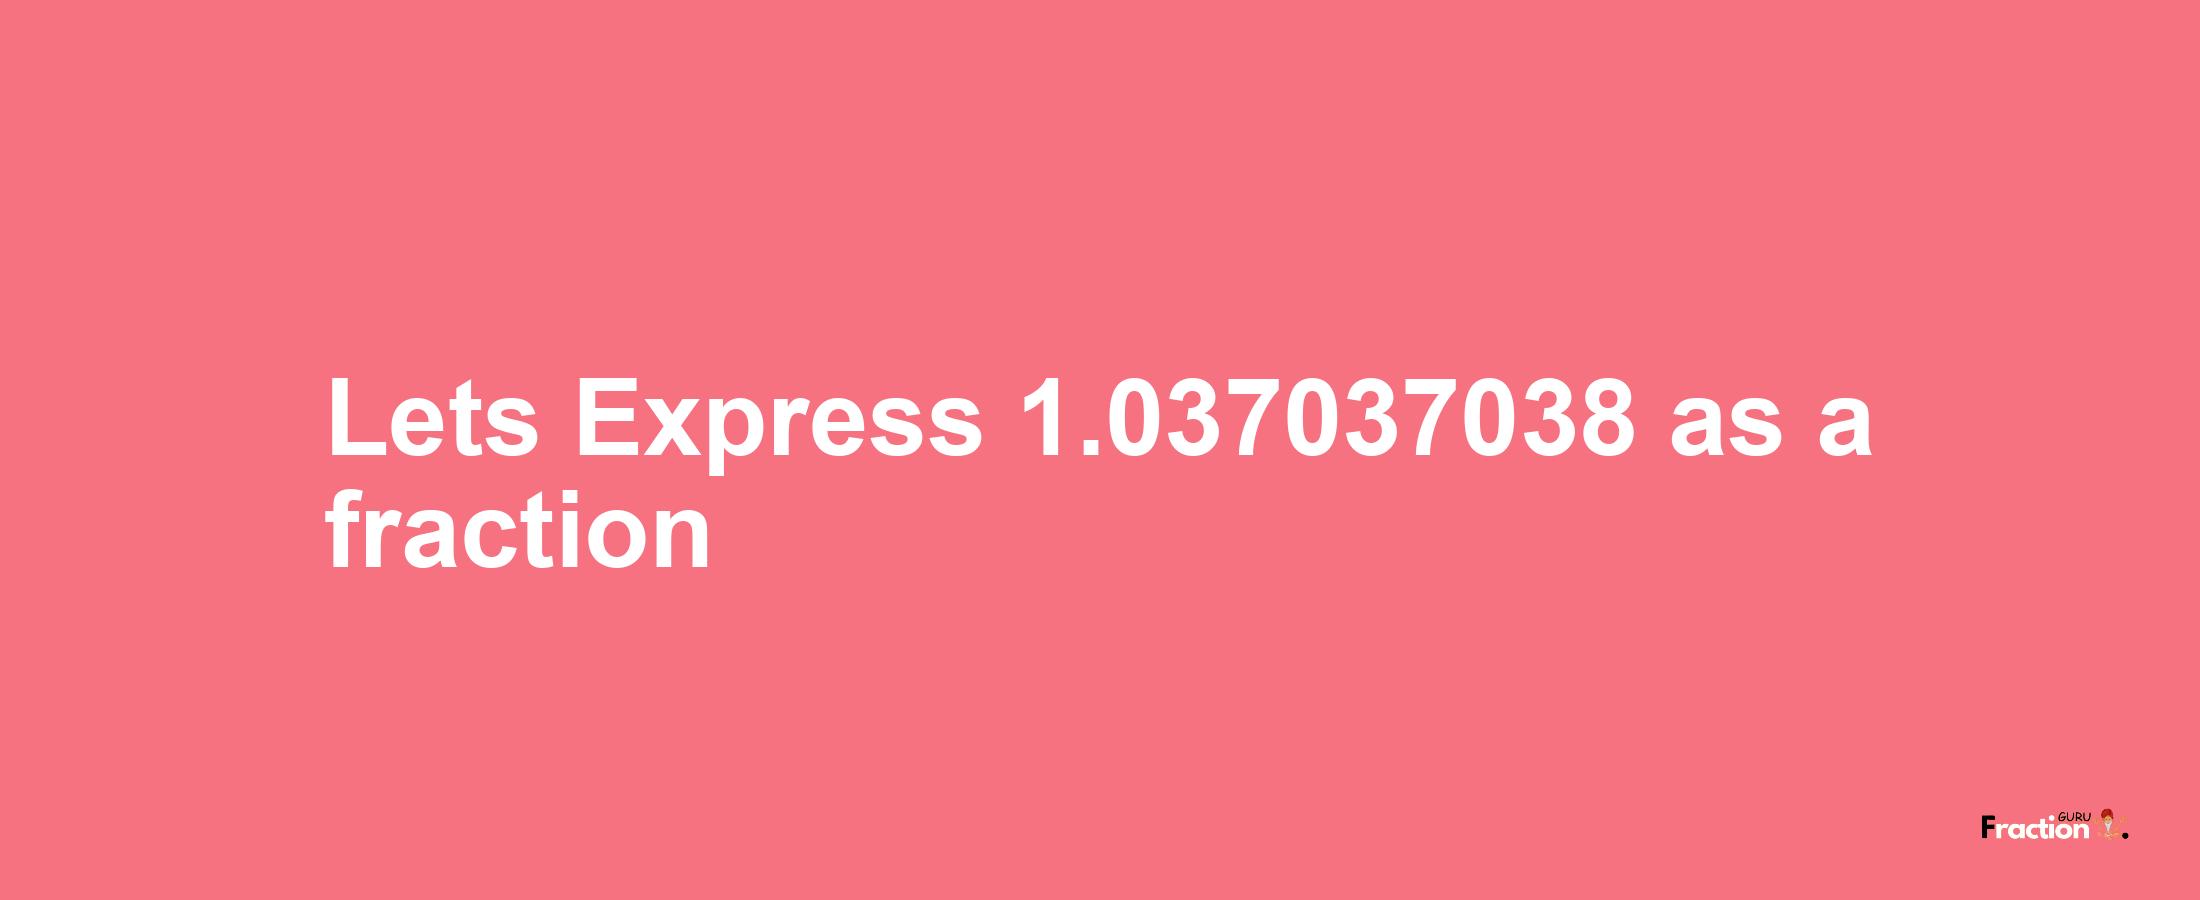 Lets Express 1.037037038 as afraction